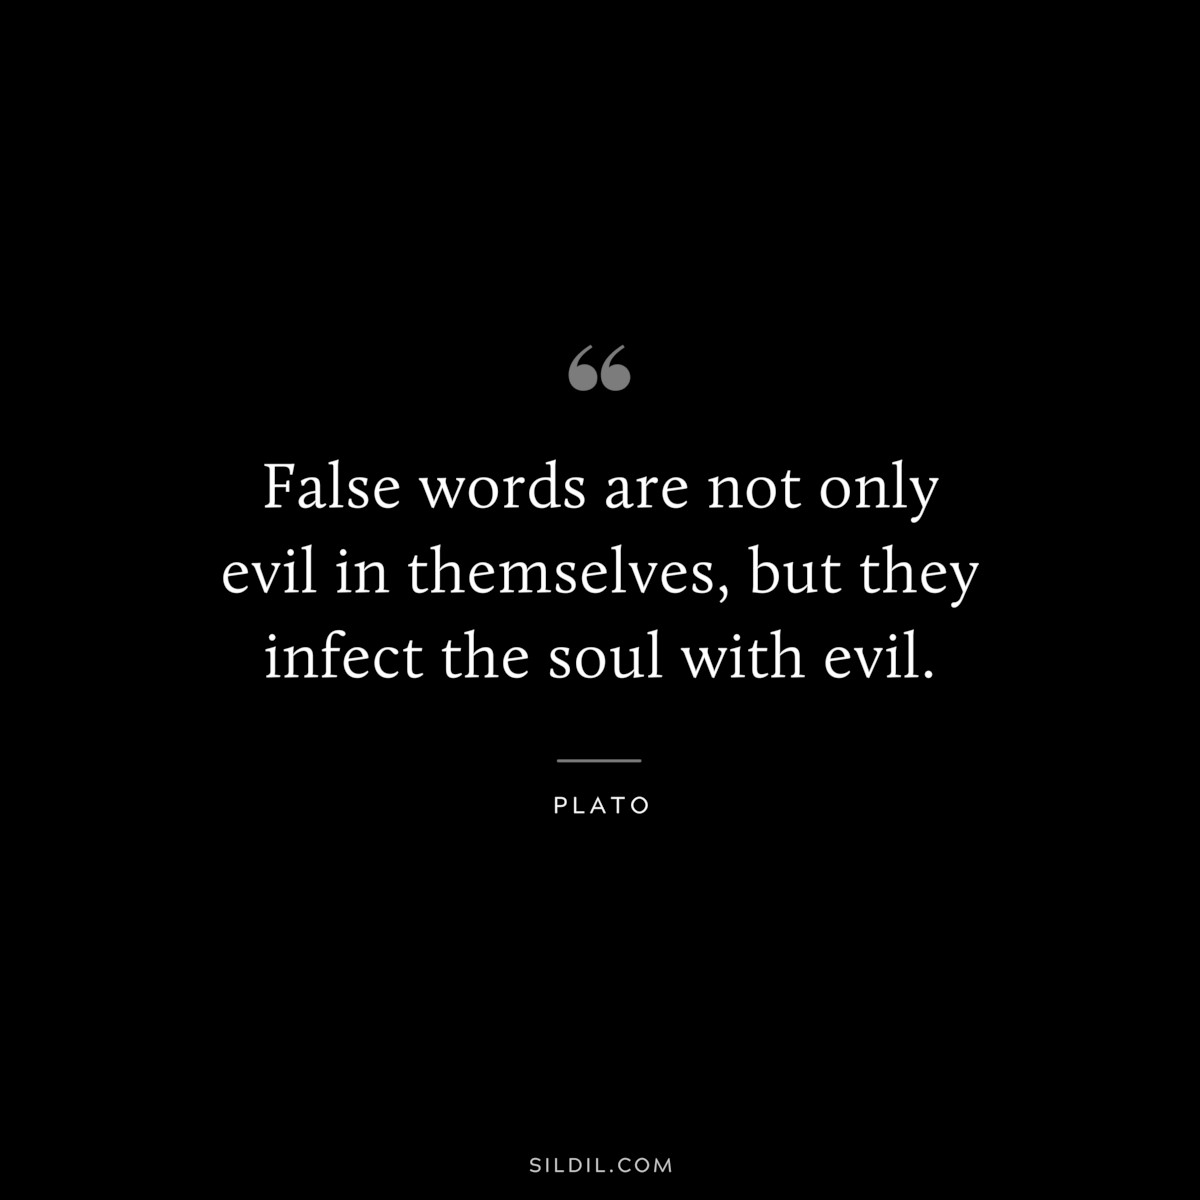 False words are not only evil in themselves, but they infect the soul with evil. ― Plato